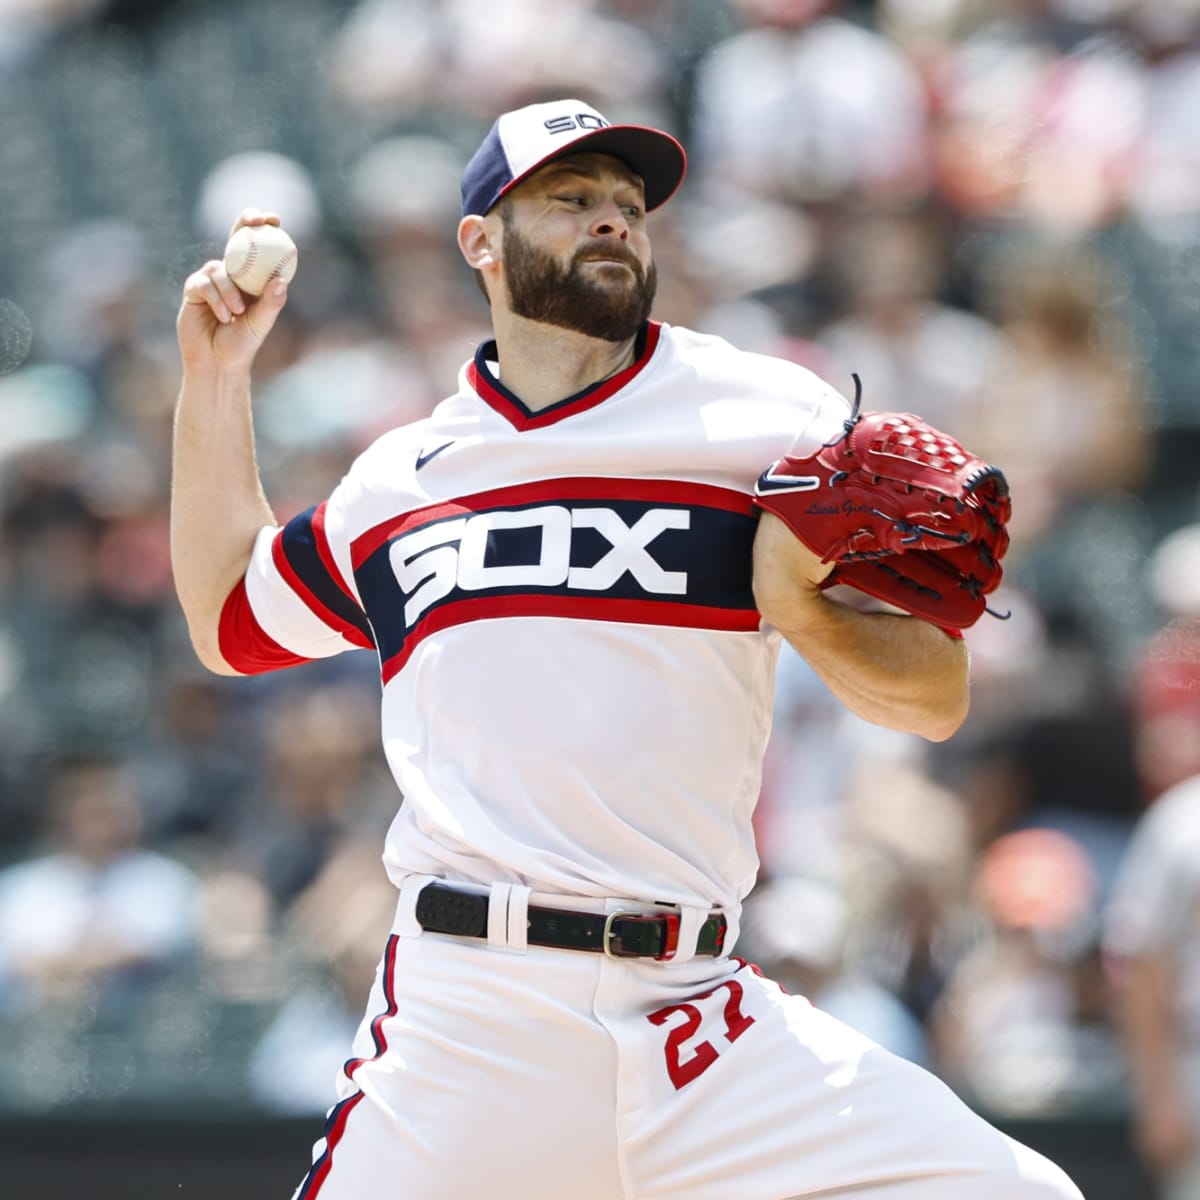 Lucas Giolito Trade to Angels Reduces Mike Hazen's Options